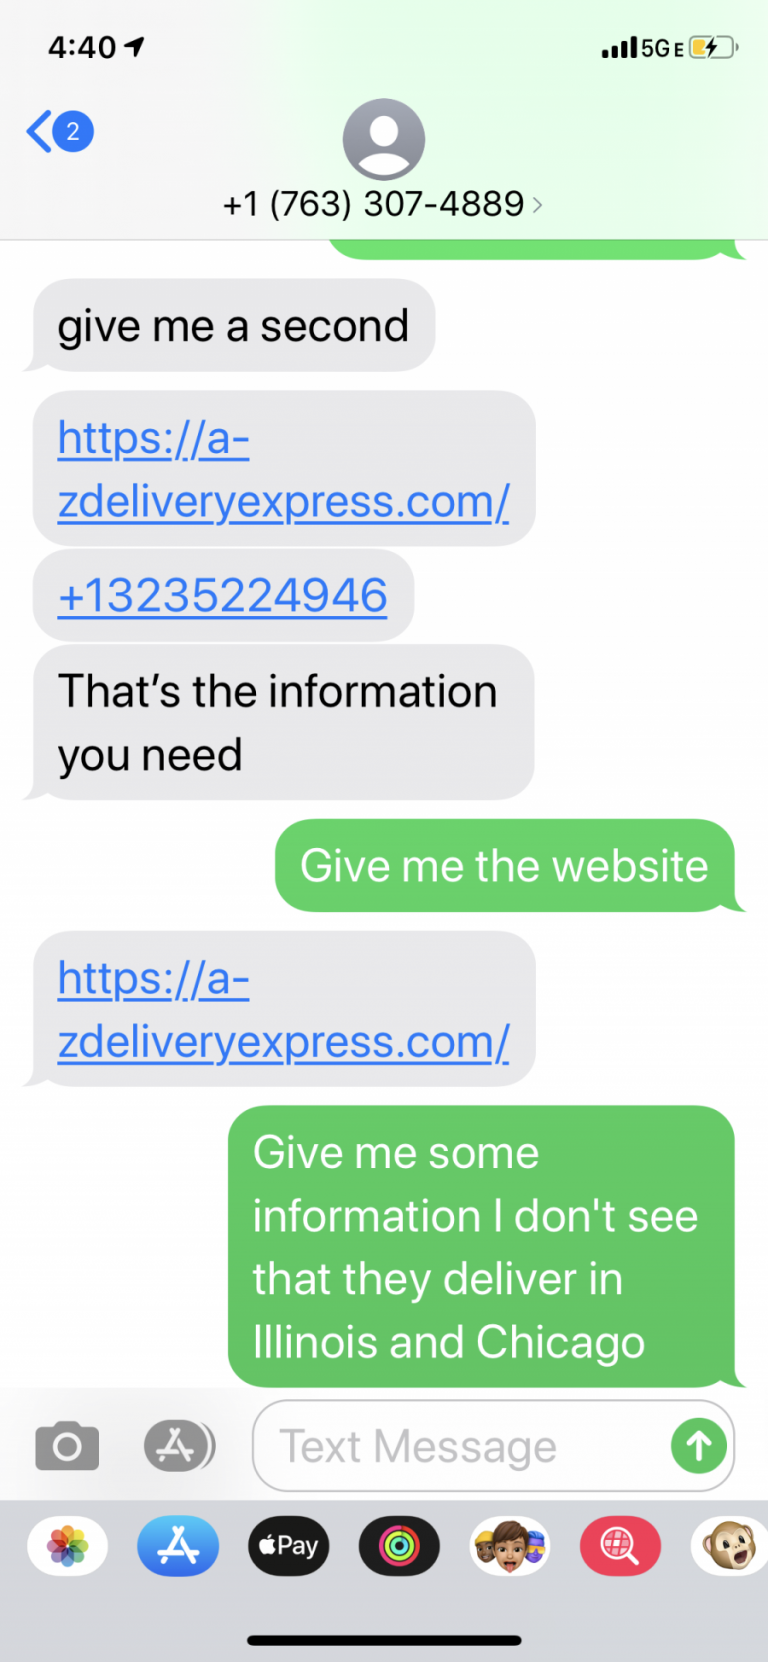 A-Z Delivery Express